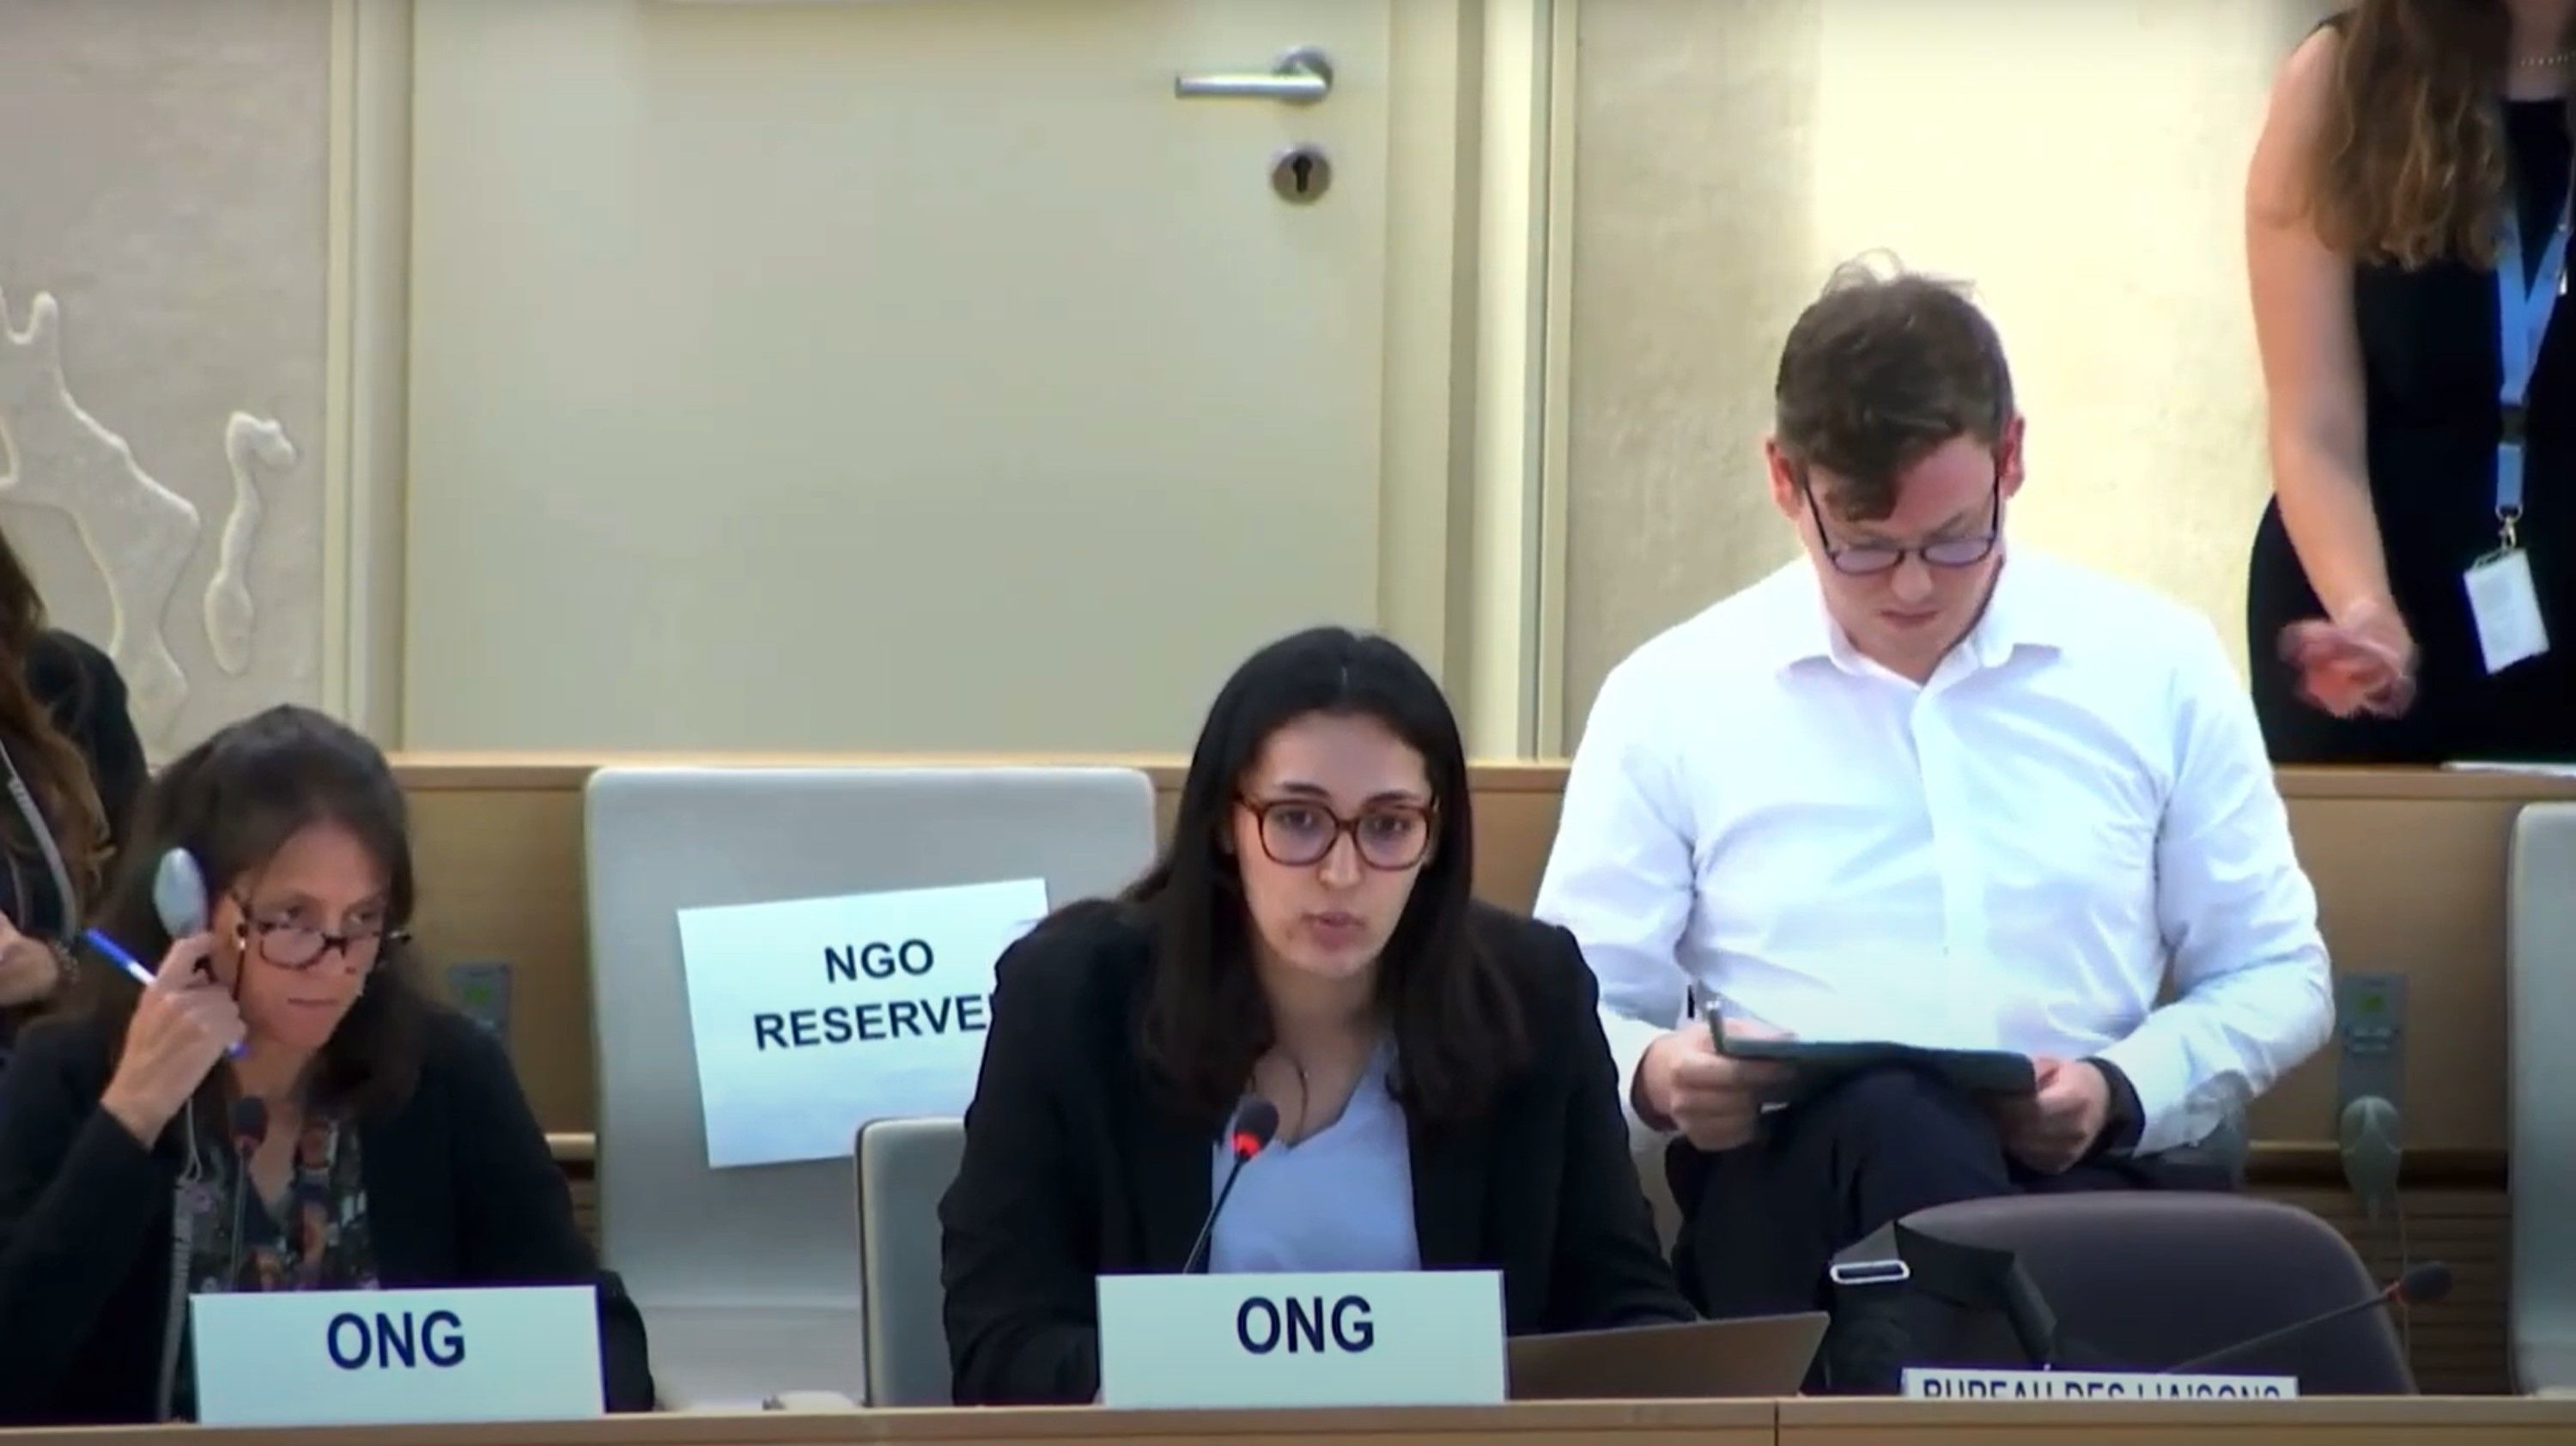 HRC 56: Ma'onah and GICJ Demand an End to Myanmar's Crisis and Call for Accountability